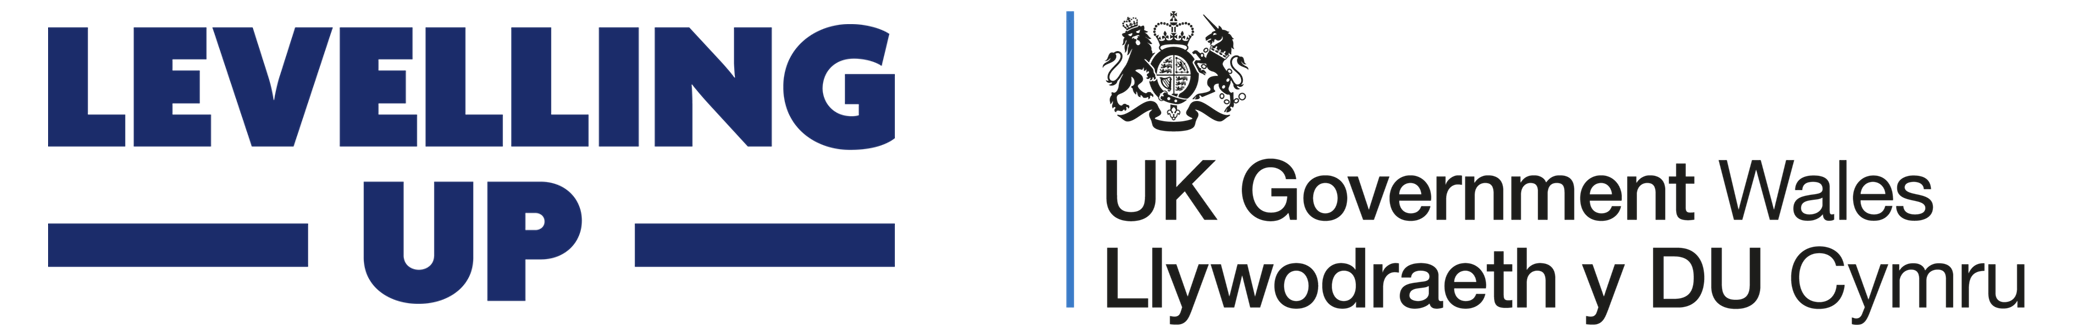 Levelling up and UK Government Wales logos